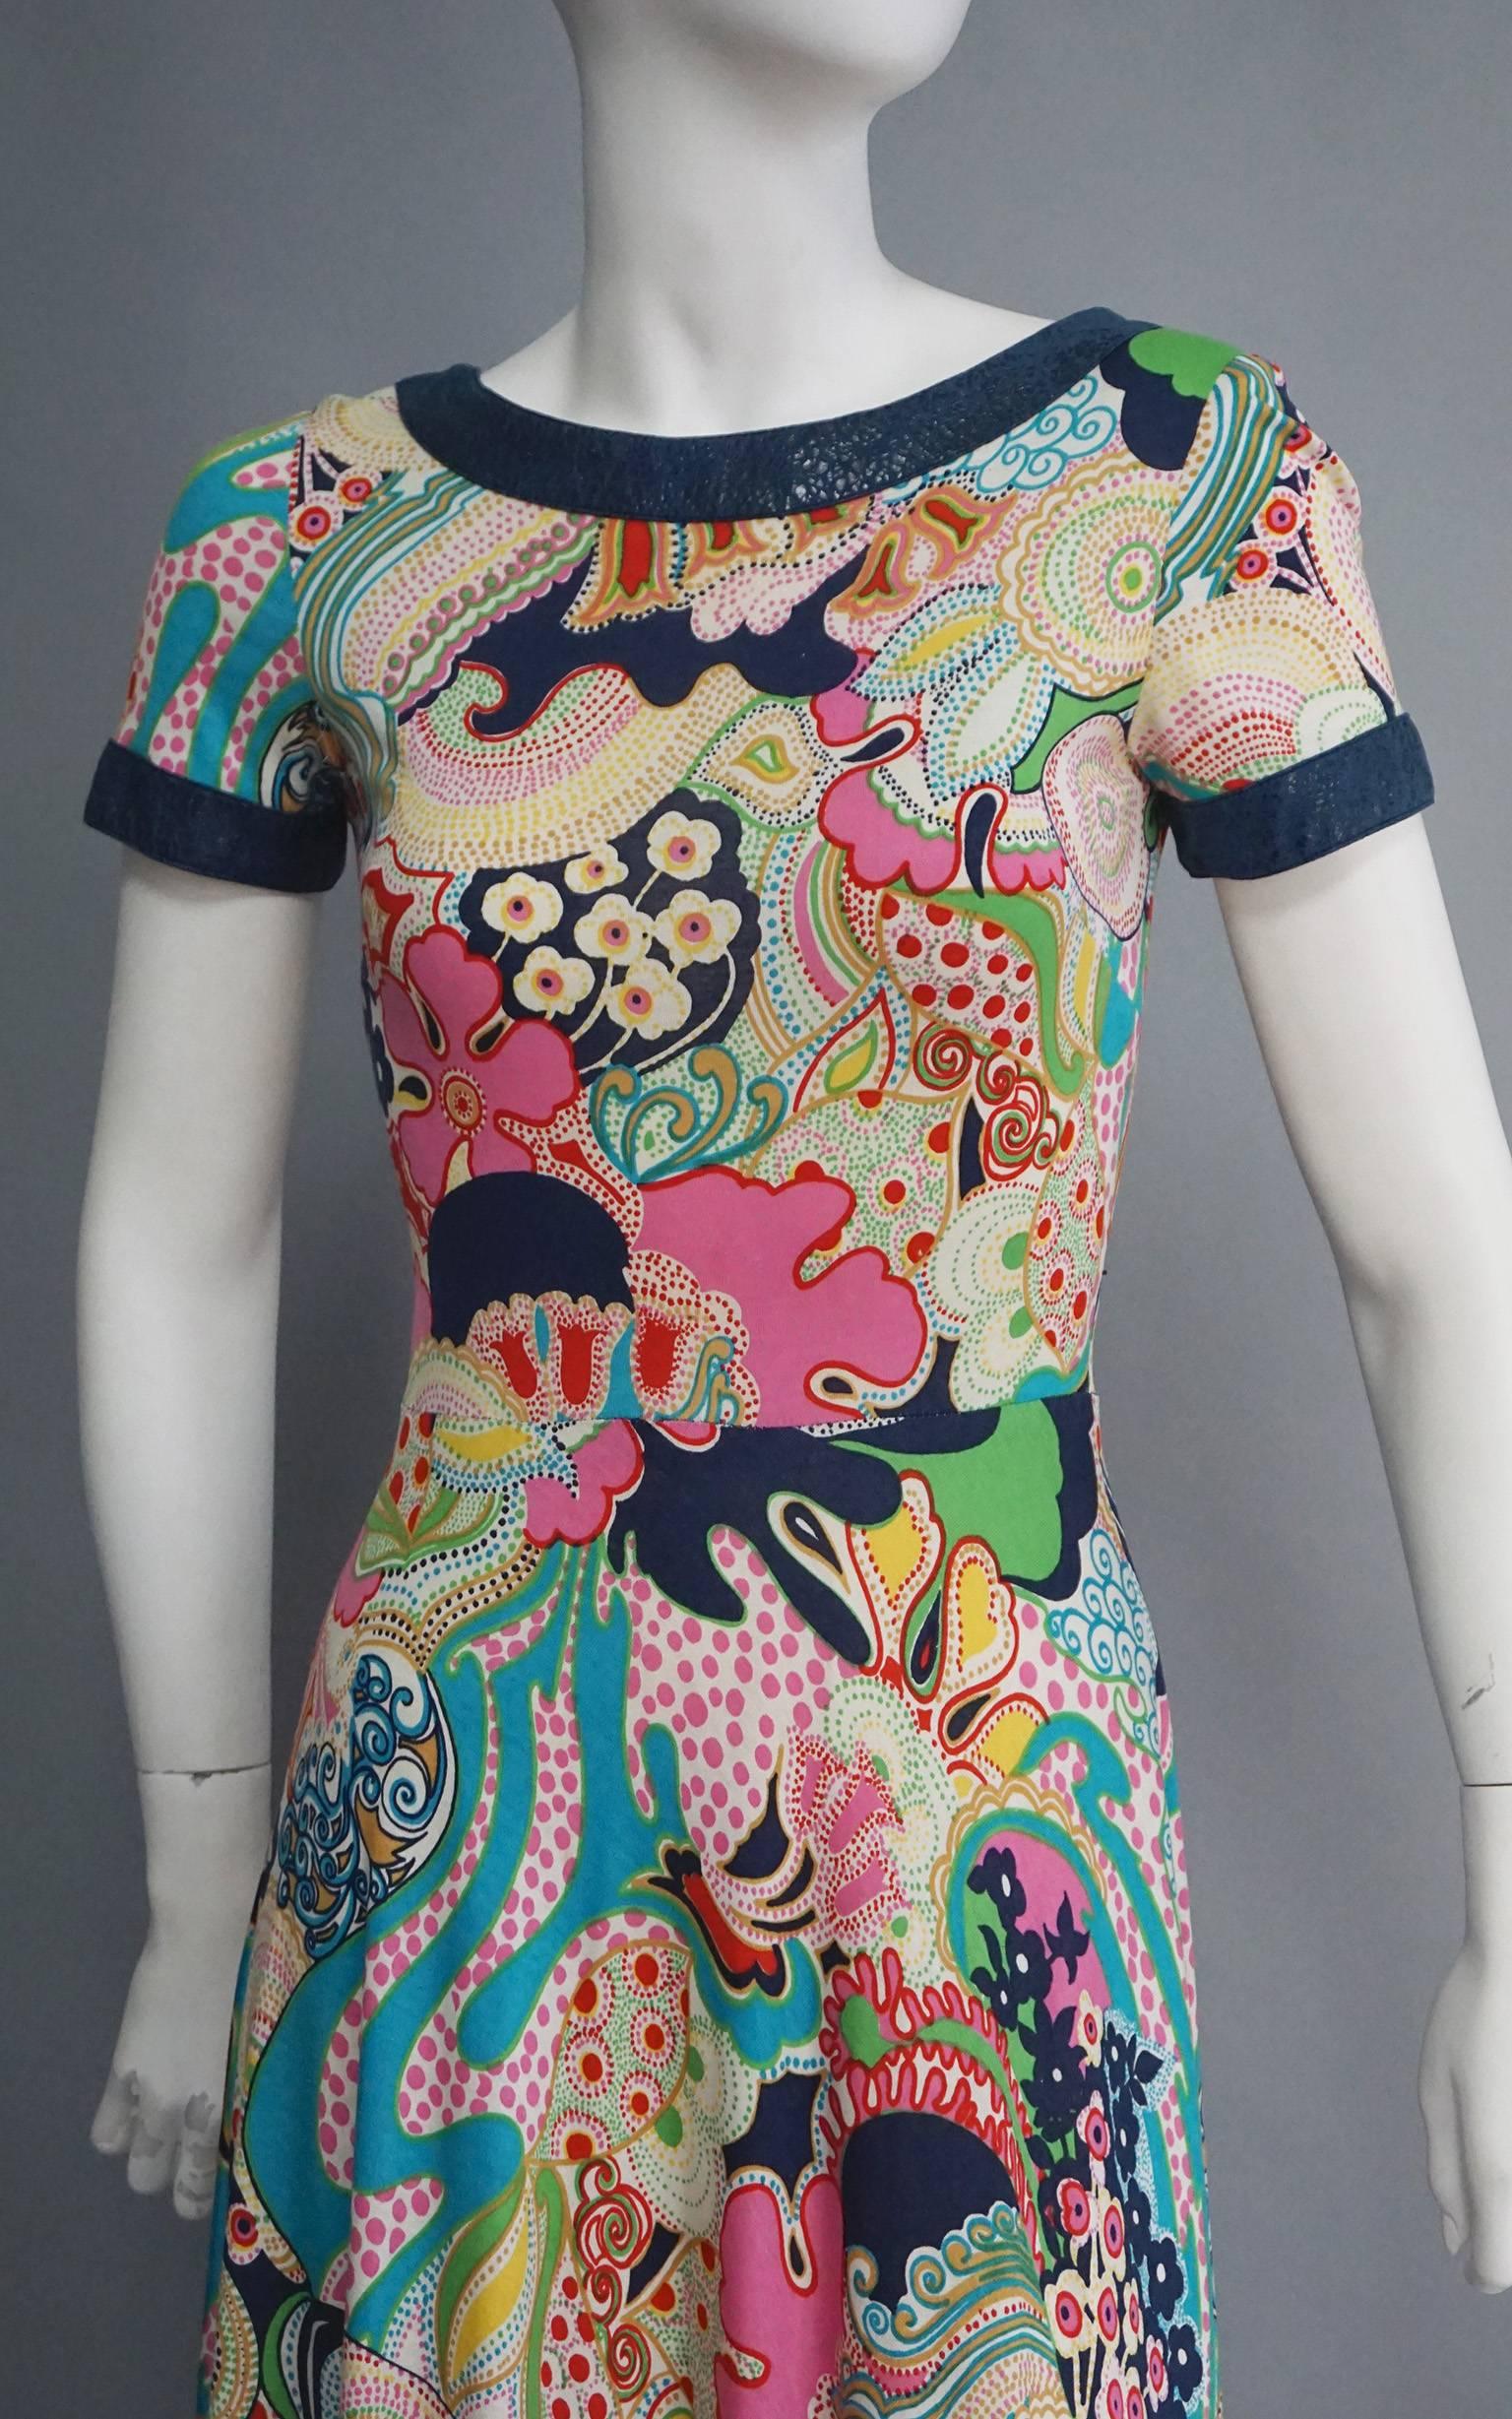 This LANVIN dress features a gorgeous psychedelic print. The colors cover the lightweight cotton fabric. It is fitted through the bodice, and then flares out over the hips into a full skirt. The neckline, sleeves and hem are all trimmed in a navy,